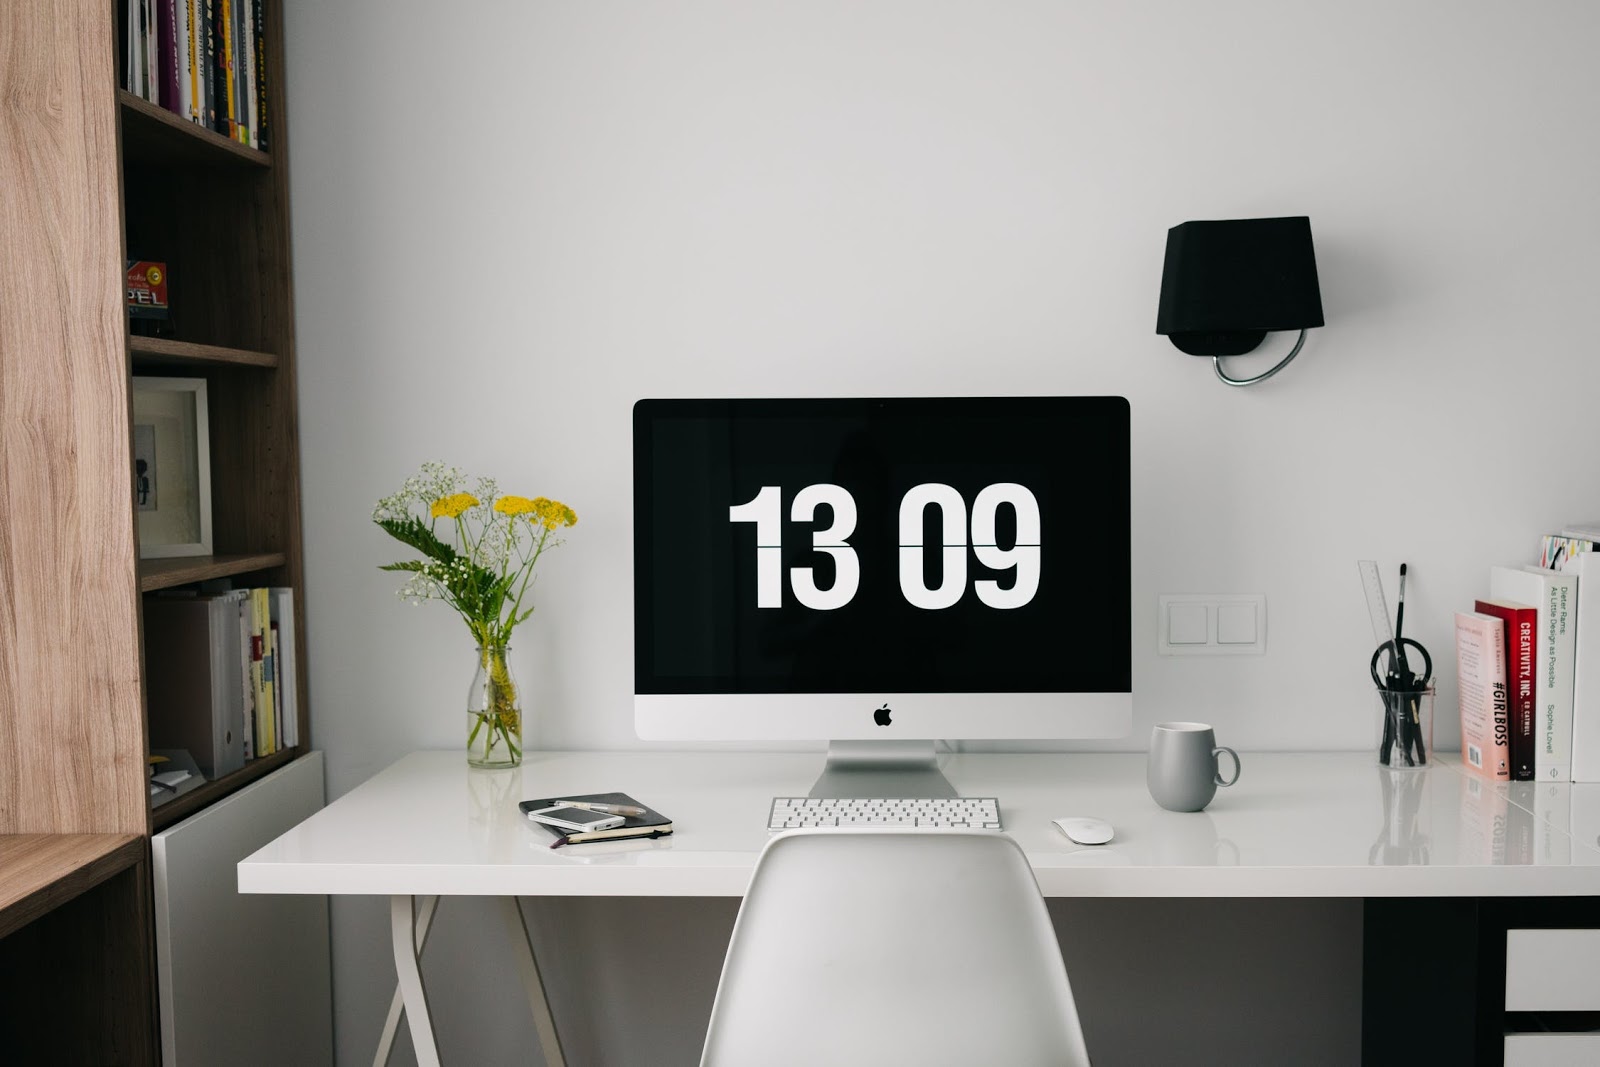 iMac with 13:09 on screensaver and computer desk